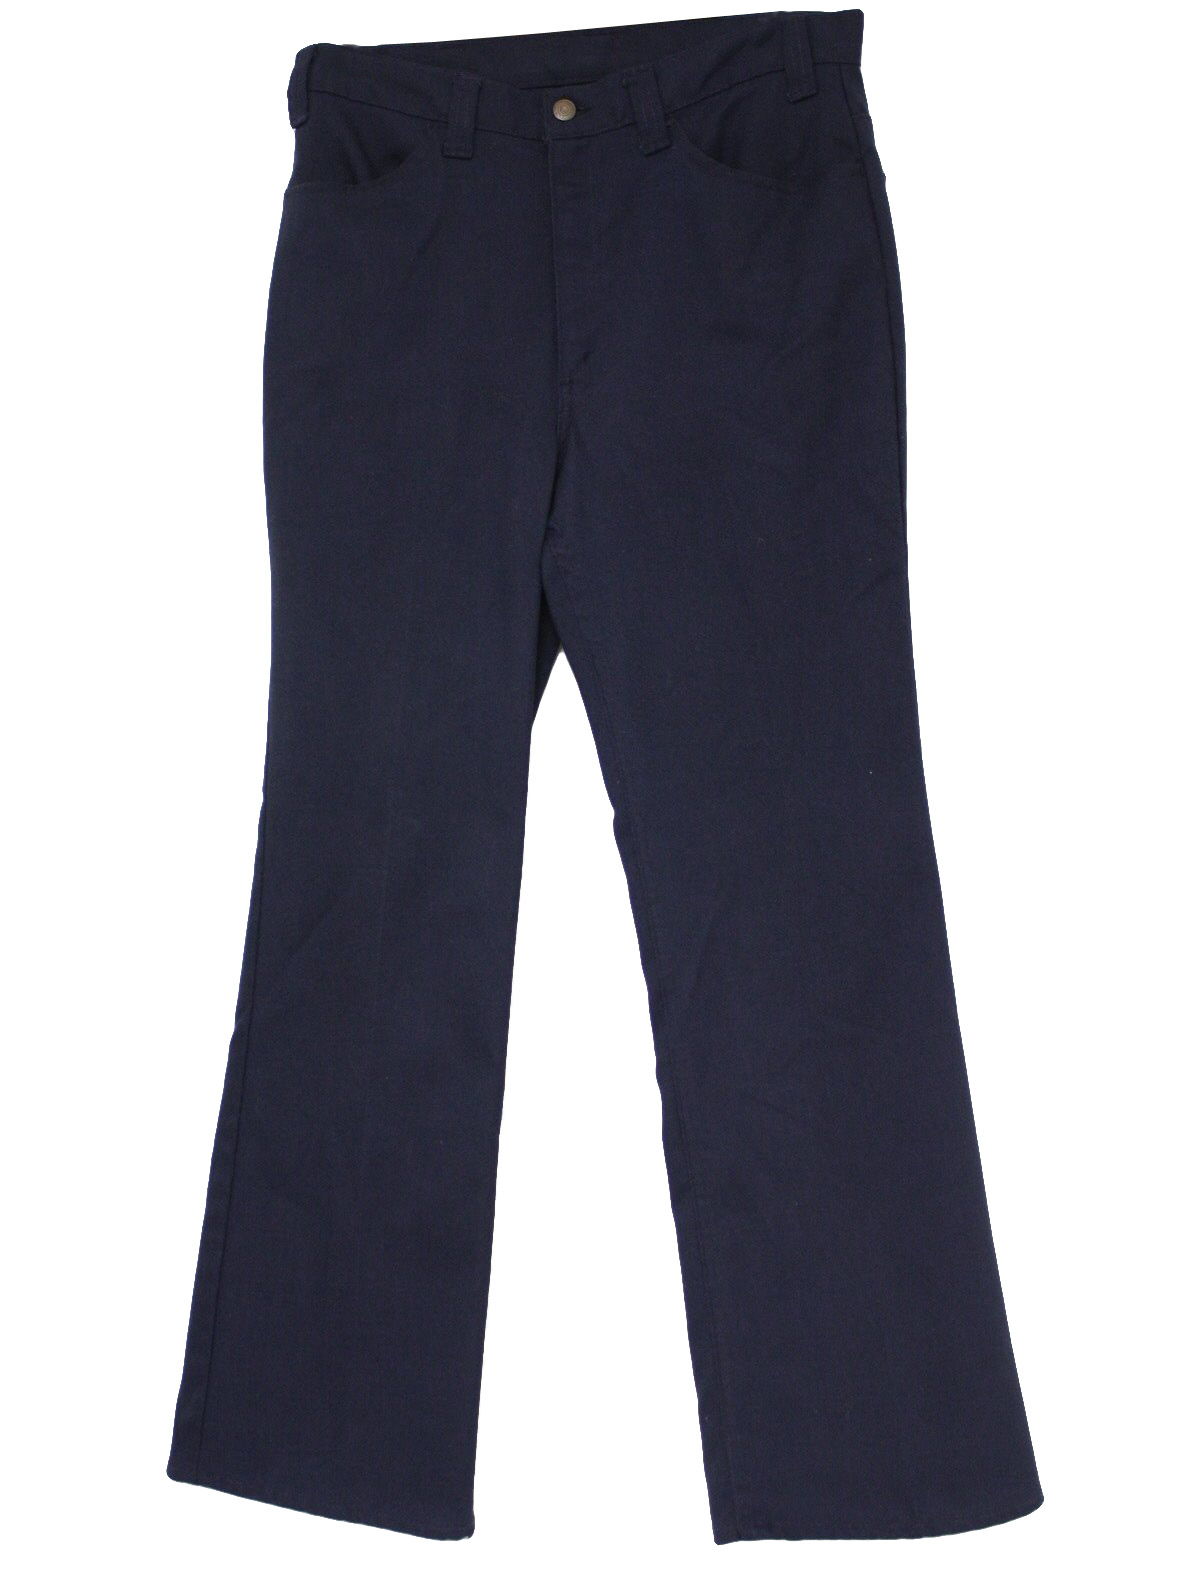 1970's Retro Pants: 70s -Levis- Mens navy blue polyester twill jeans ...